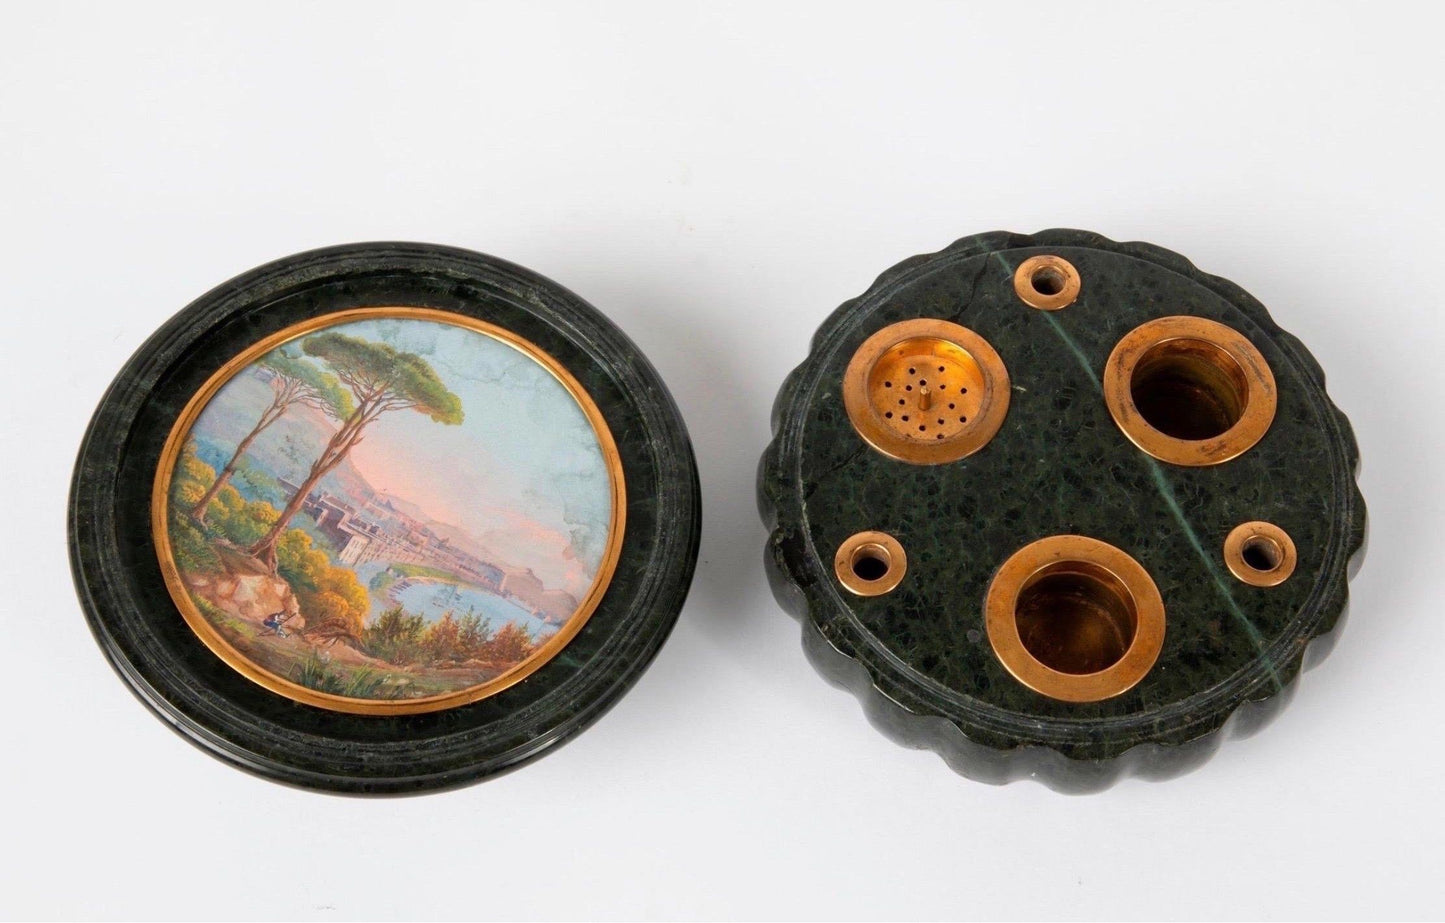 Grand Tour Serpentine Inkwell and Cover Inset with 7 Lava Stone Cameos, 19th C